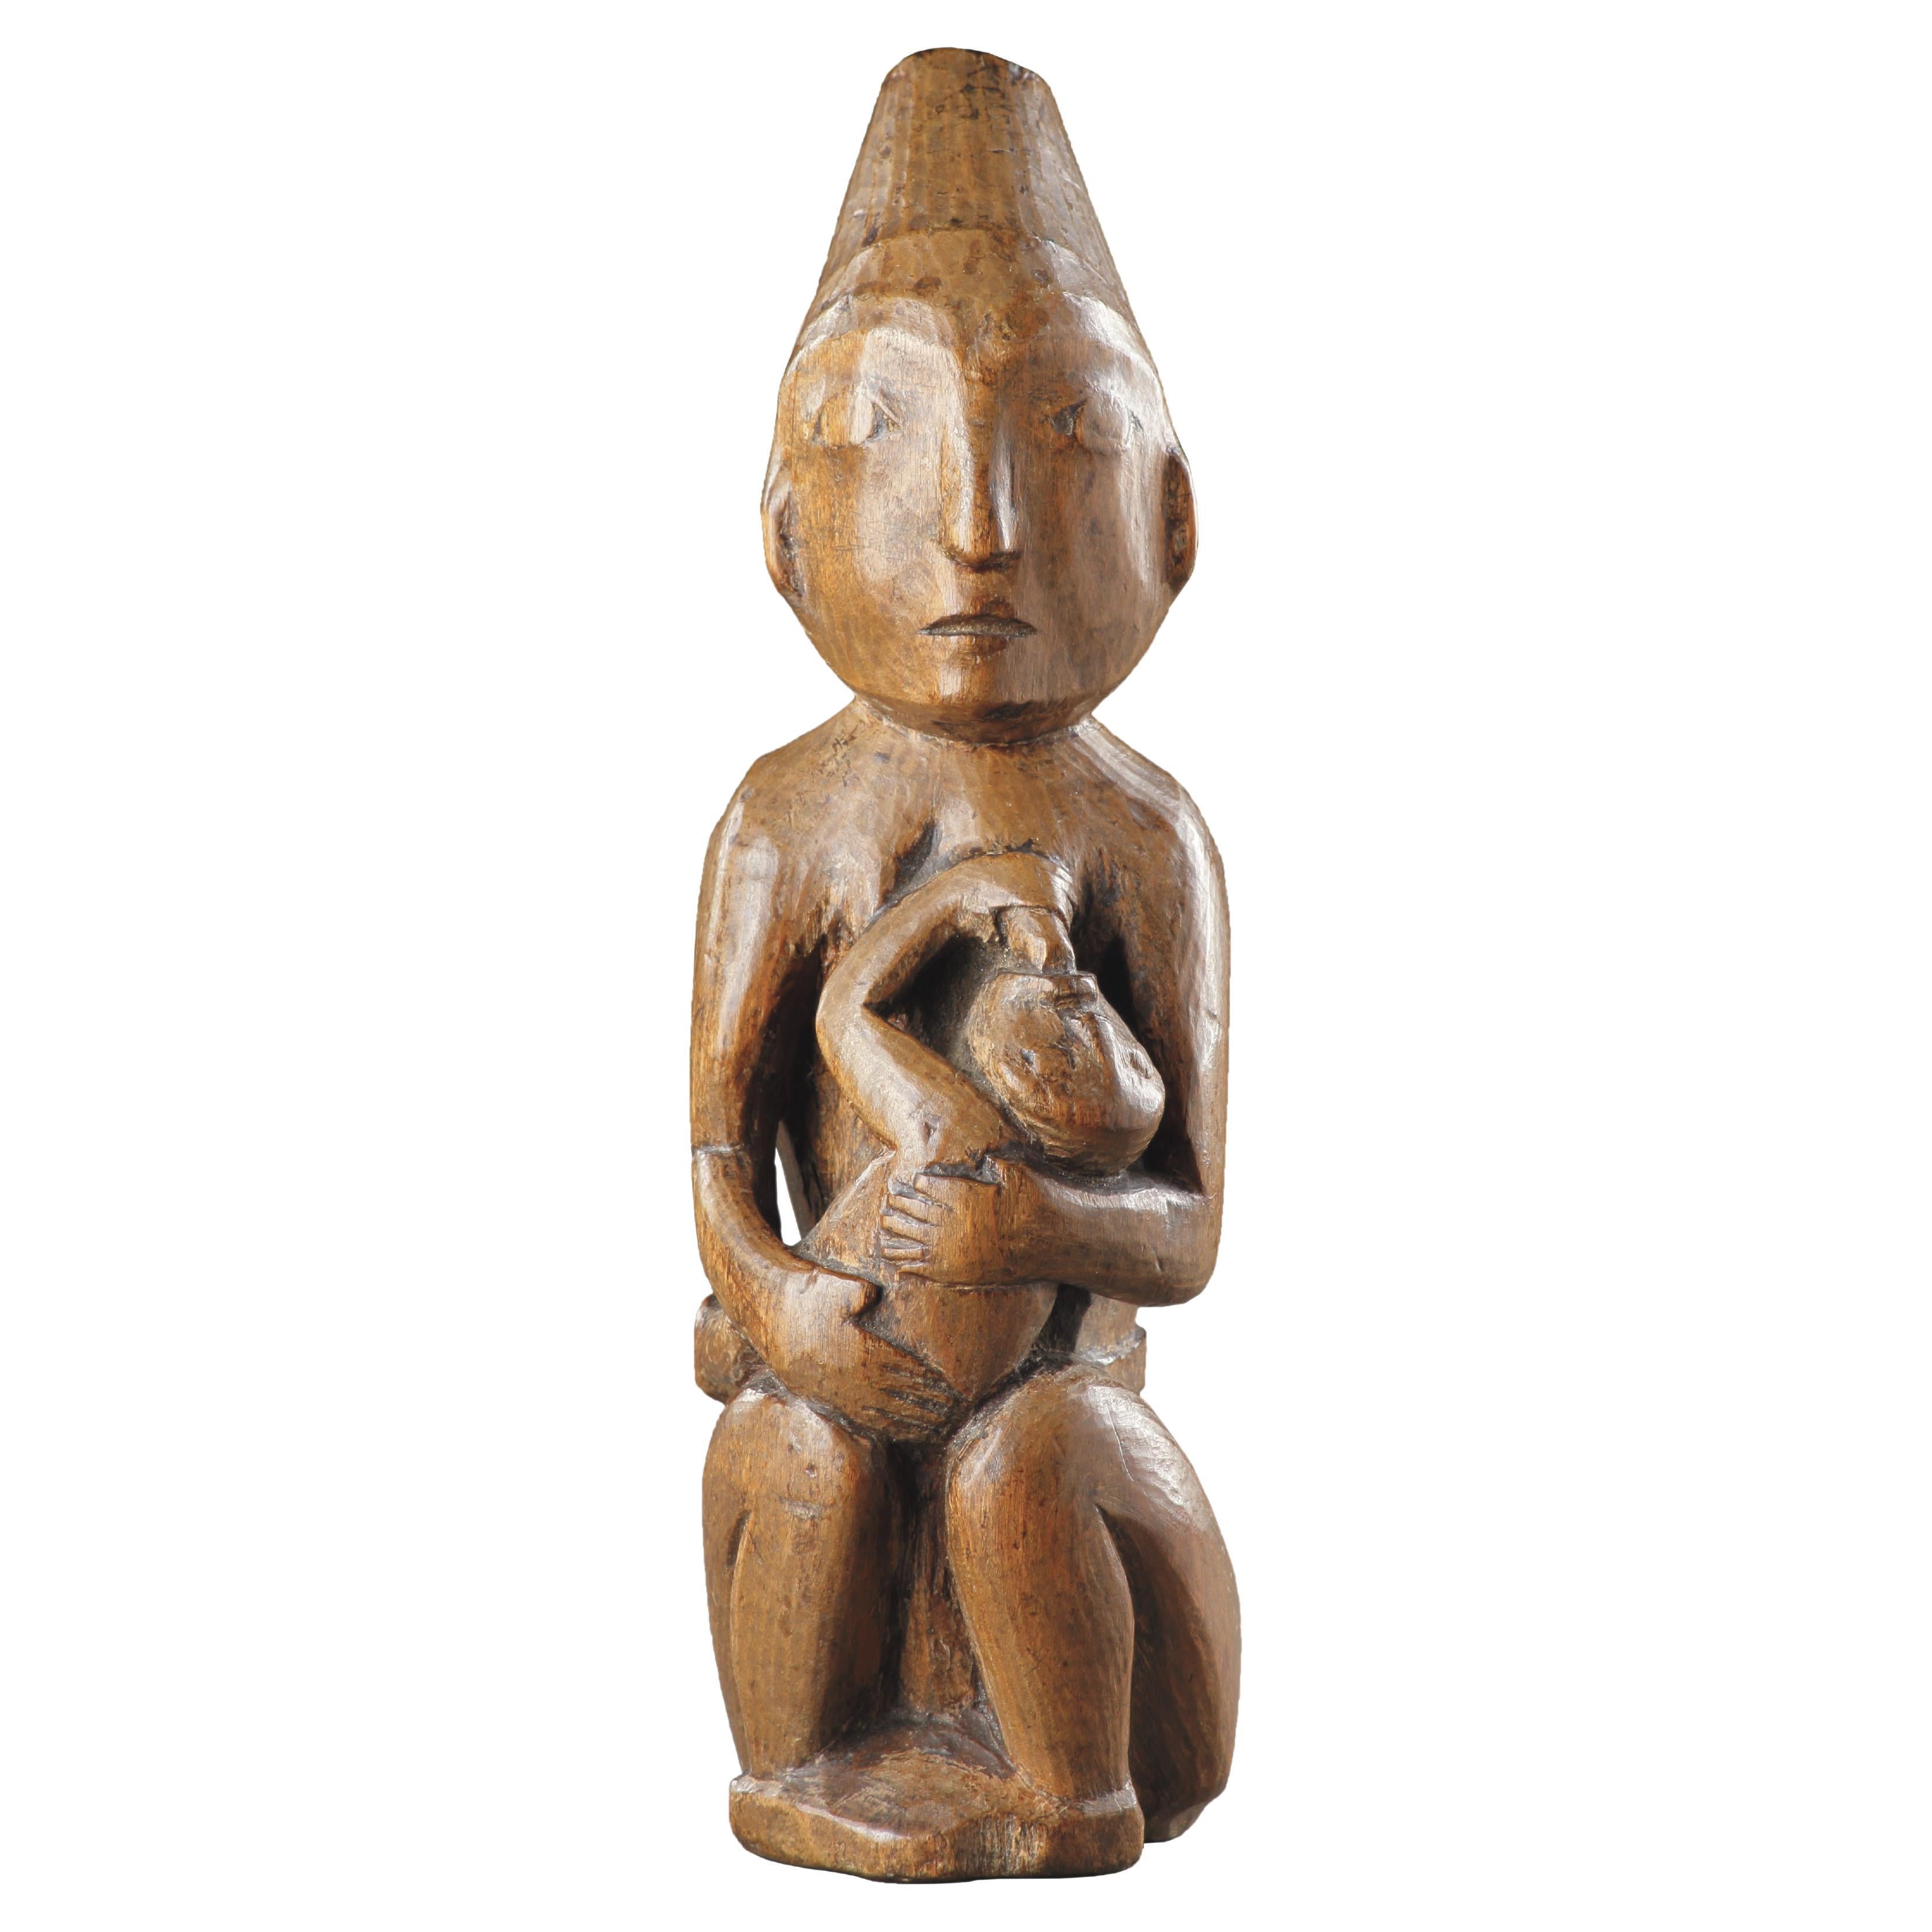 A Very Rare and Early Northwest Coast Maternity Figure